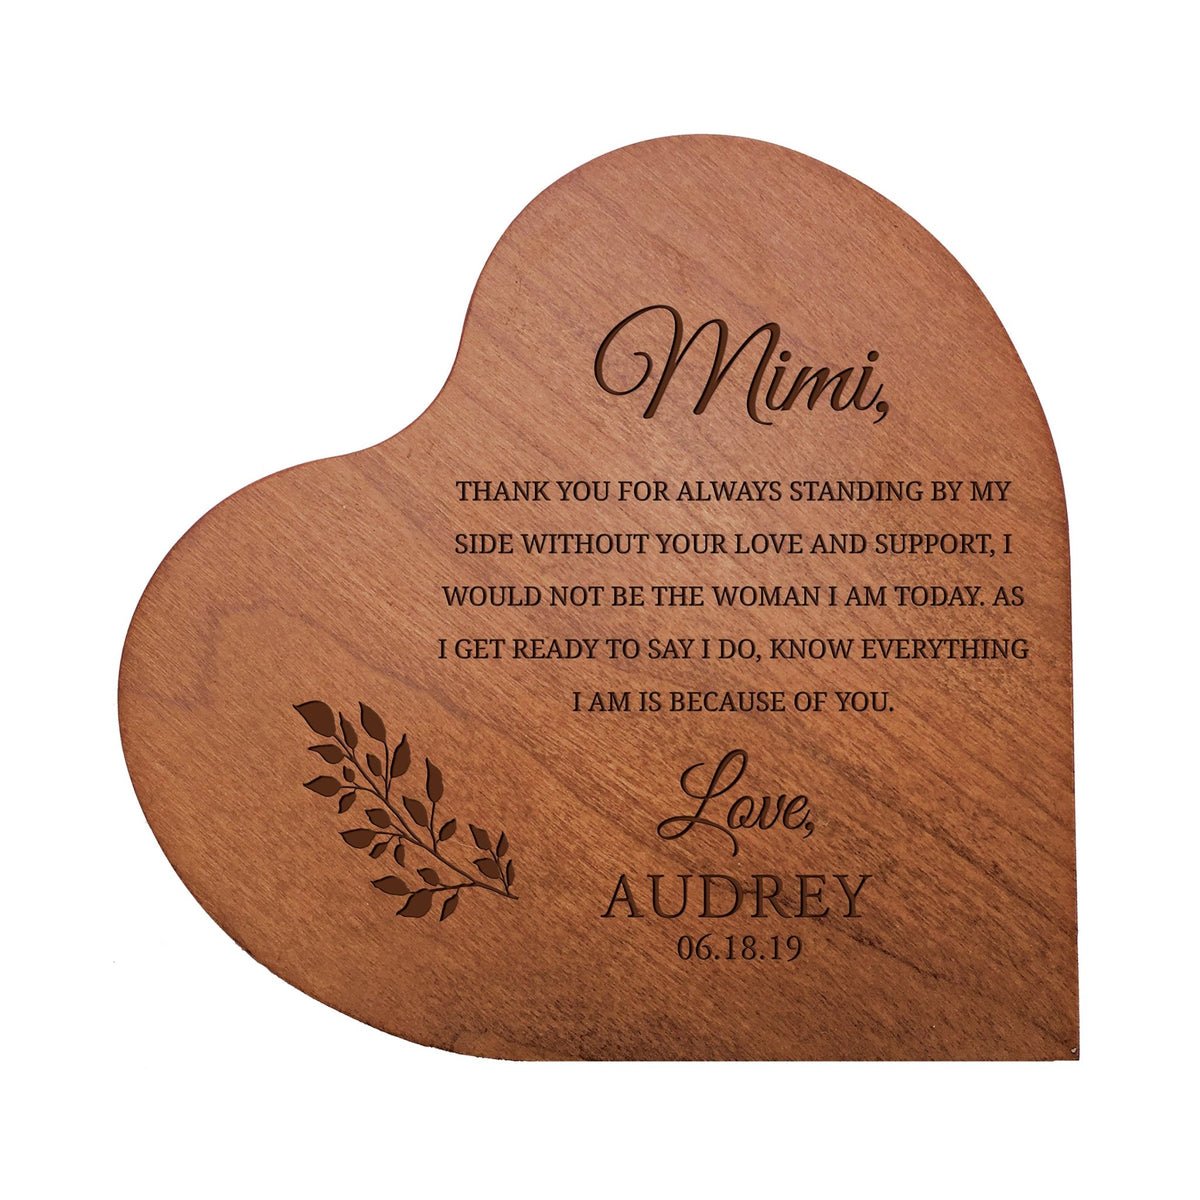 Personalized Modern Mimi’s Love Solid Wood Heart Decoration With Inspirational Verse Keepsake Gift 5x5.25 - Mimi Thank You For = Love And Support - LifeSong Milestones